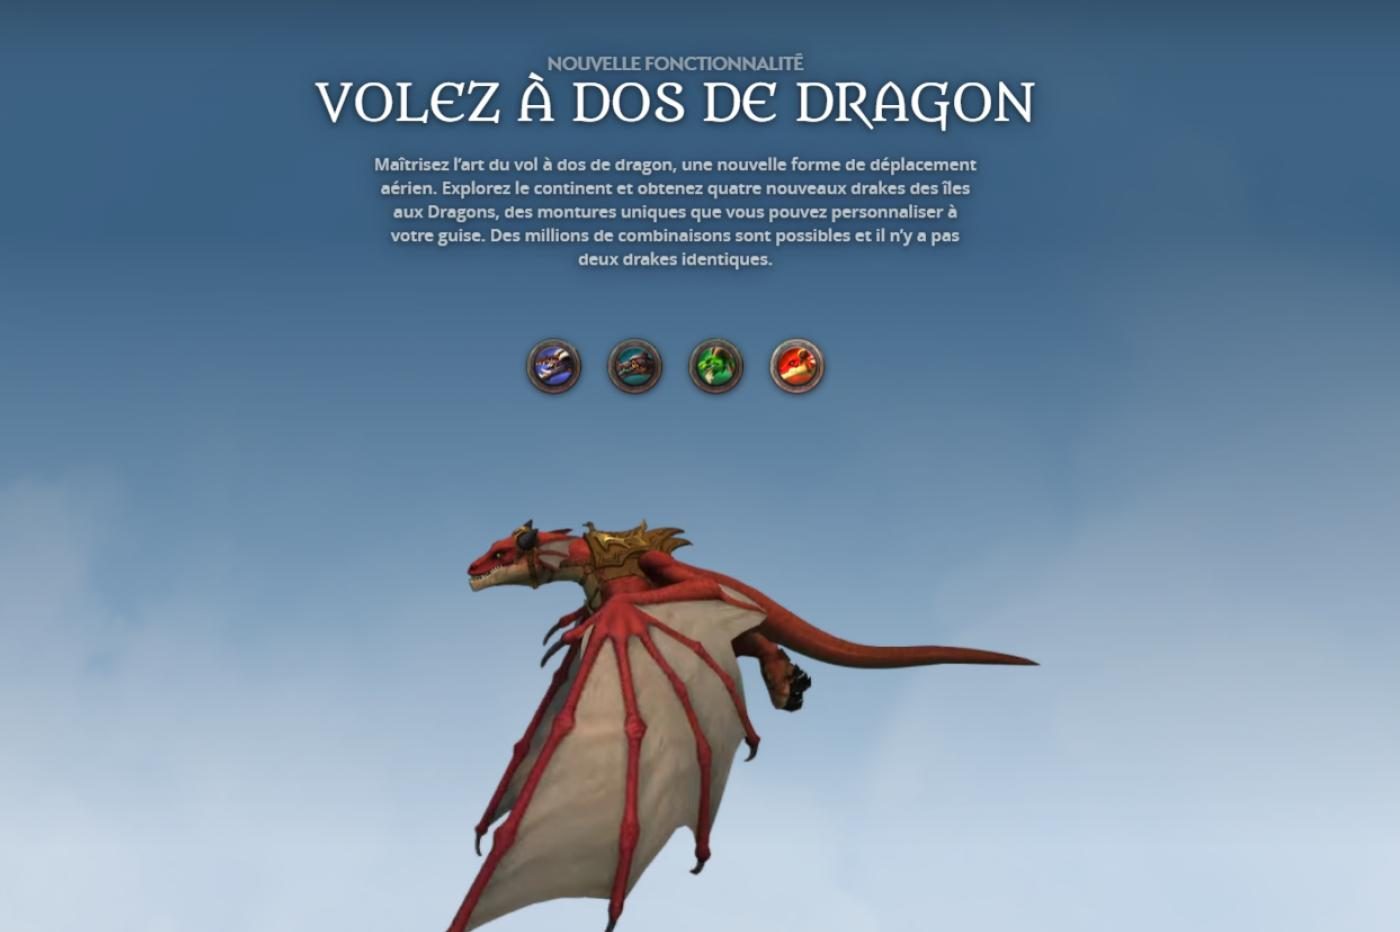 Promotional image for new WoW mounts explaining the 4 types of dragons and showing a red dragon in flight